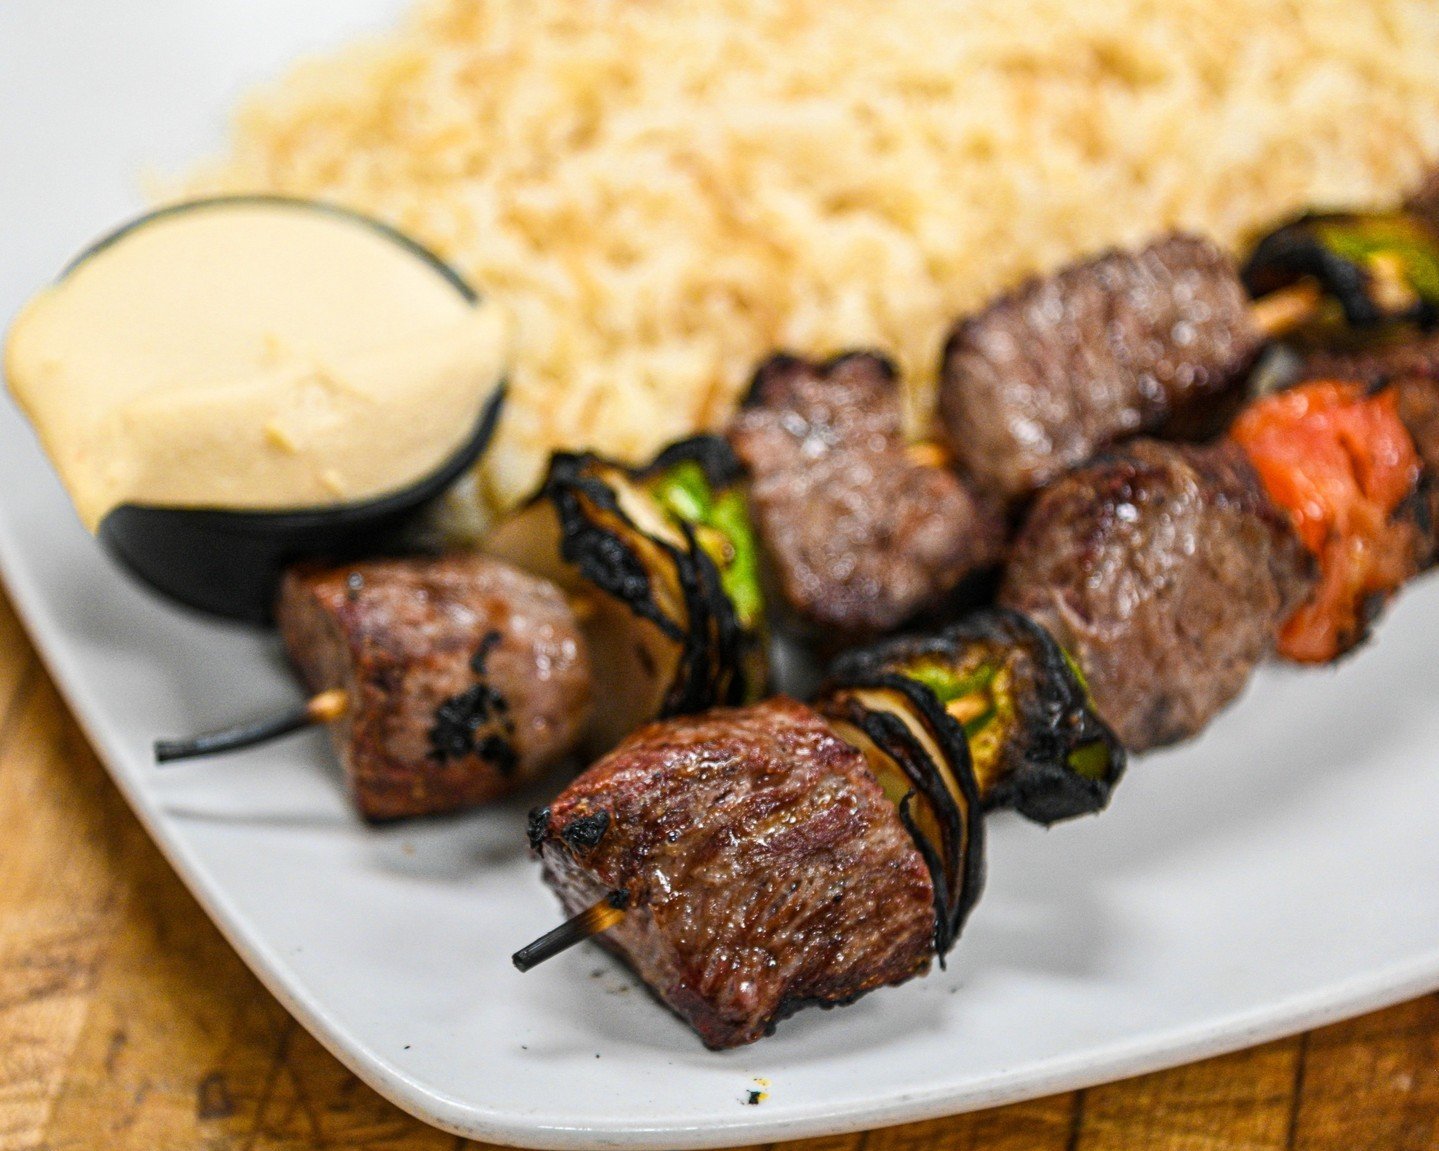 Savor the sizzle! Our mouthwatering beef kebobs are skewered perfection, ready to tantalize your taste buds with every juicy bite! ⠀
⠀
👉 Open from 11am to 9pm.⠀
👉 View Menu + Order Online: link in bio⠀
⠀
#IkesRestaurant #SterlingHeights #DetroitFoo